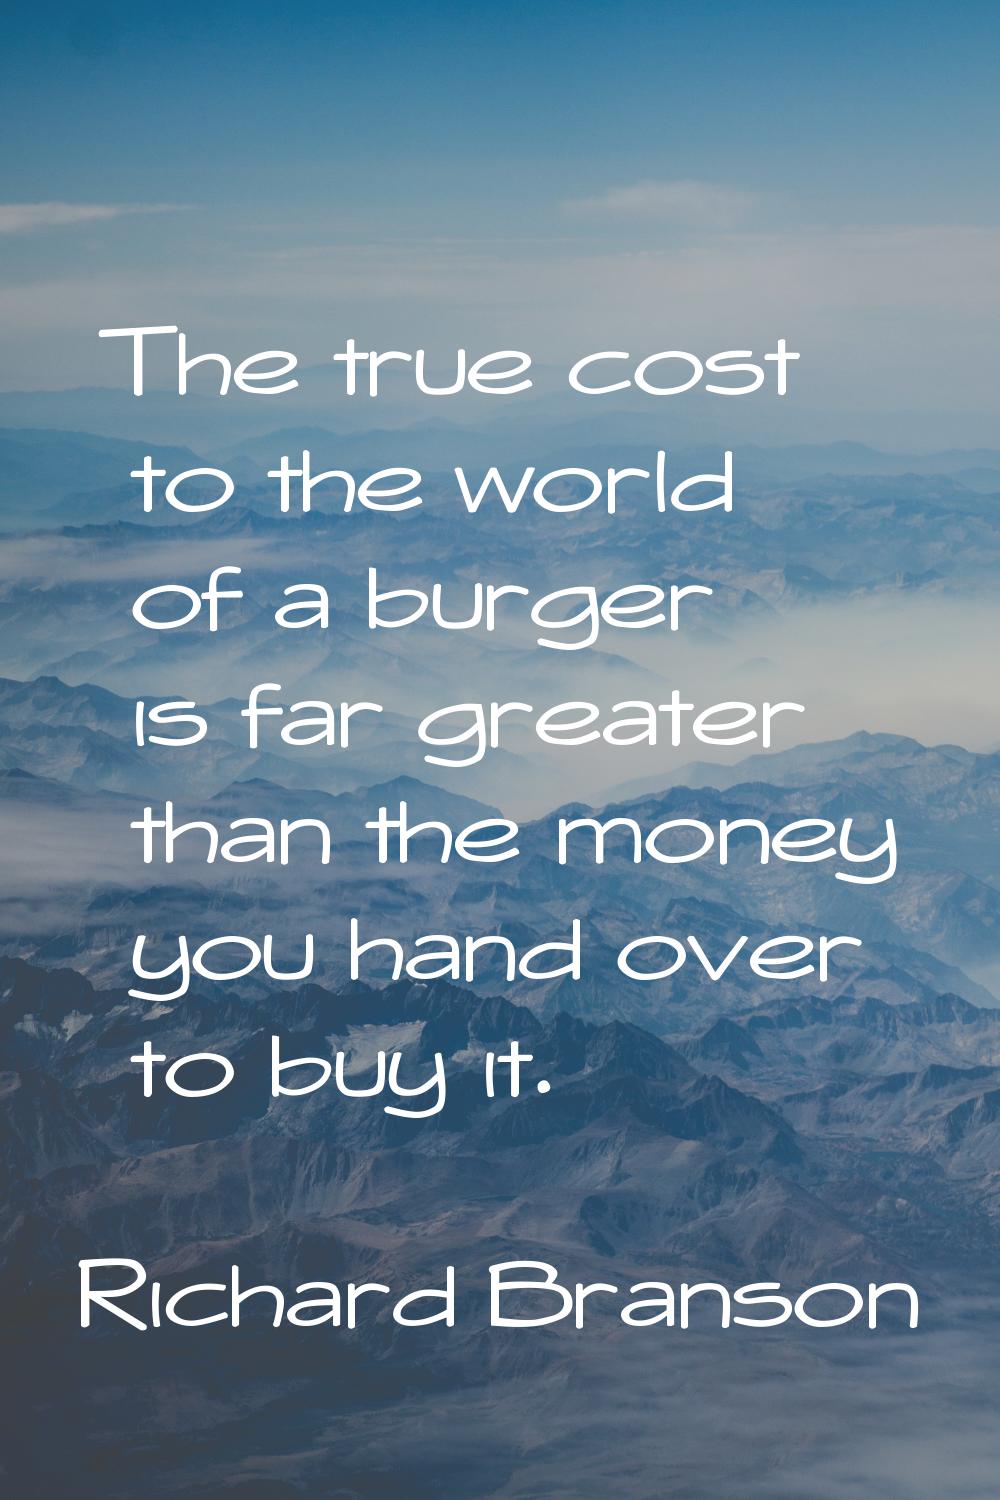 The true cost to the world of a burger is far greater than the money you hand over to buy it.